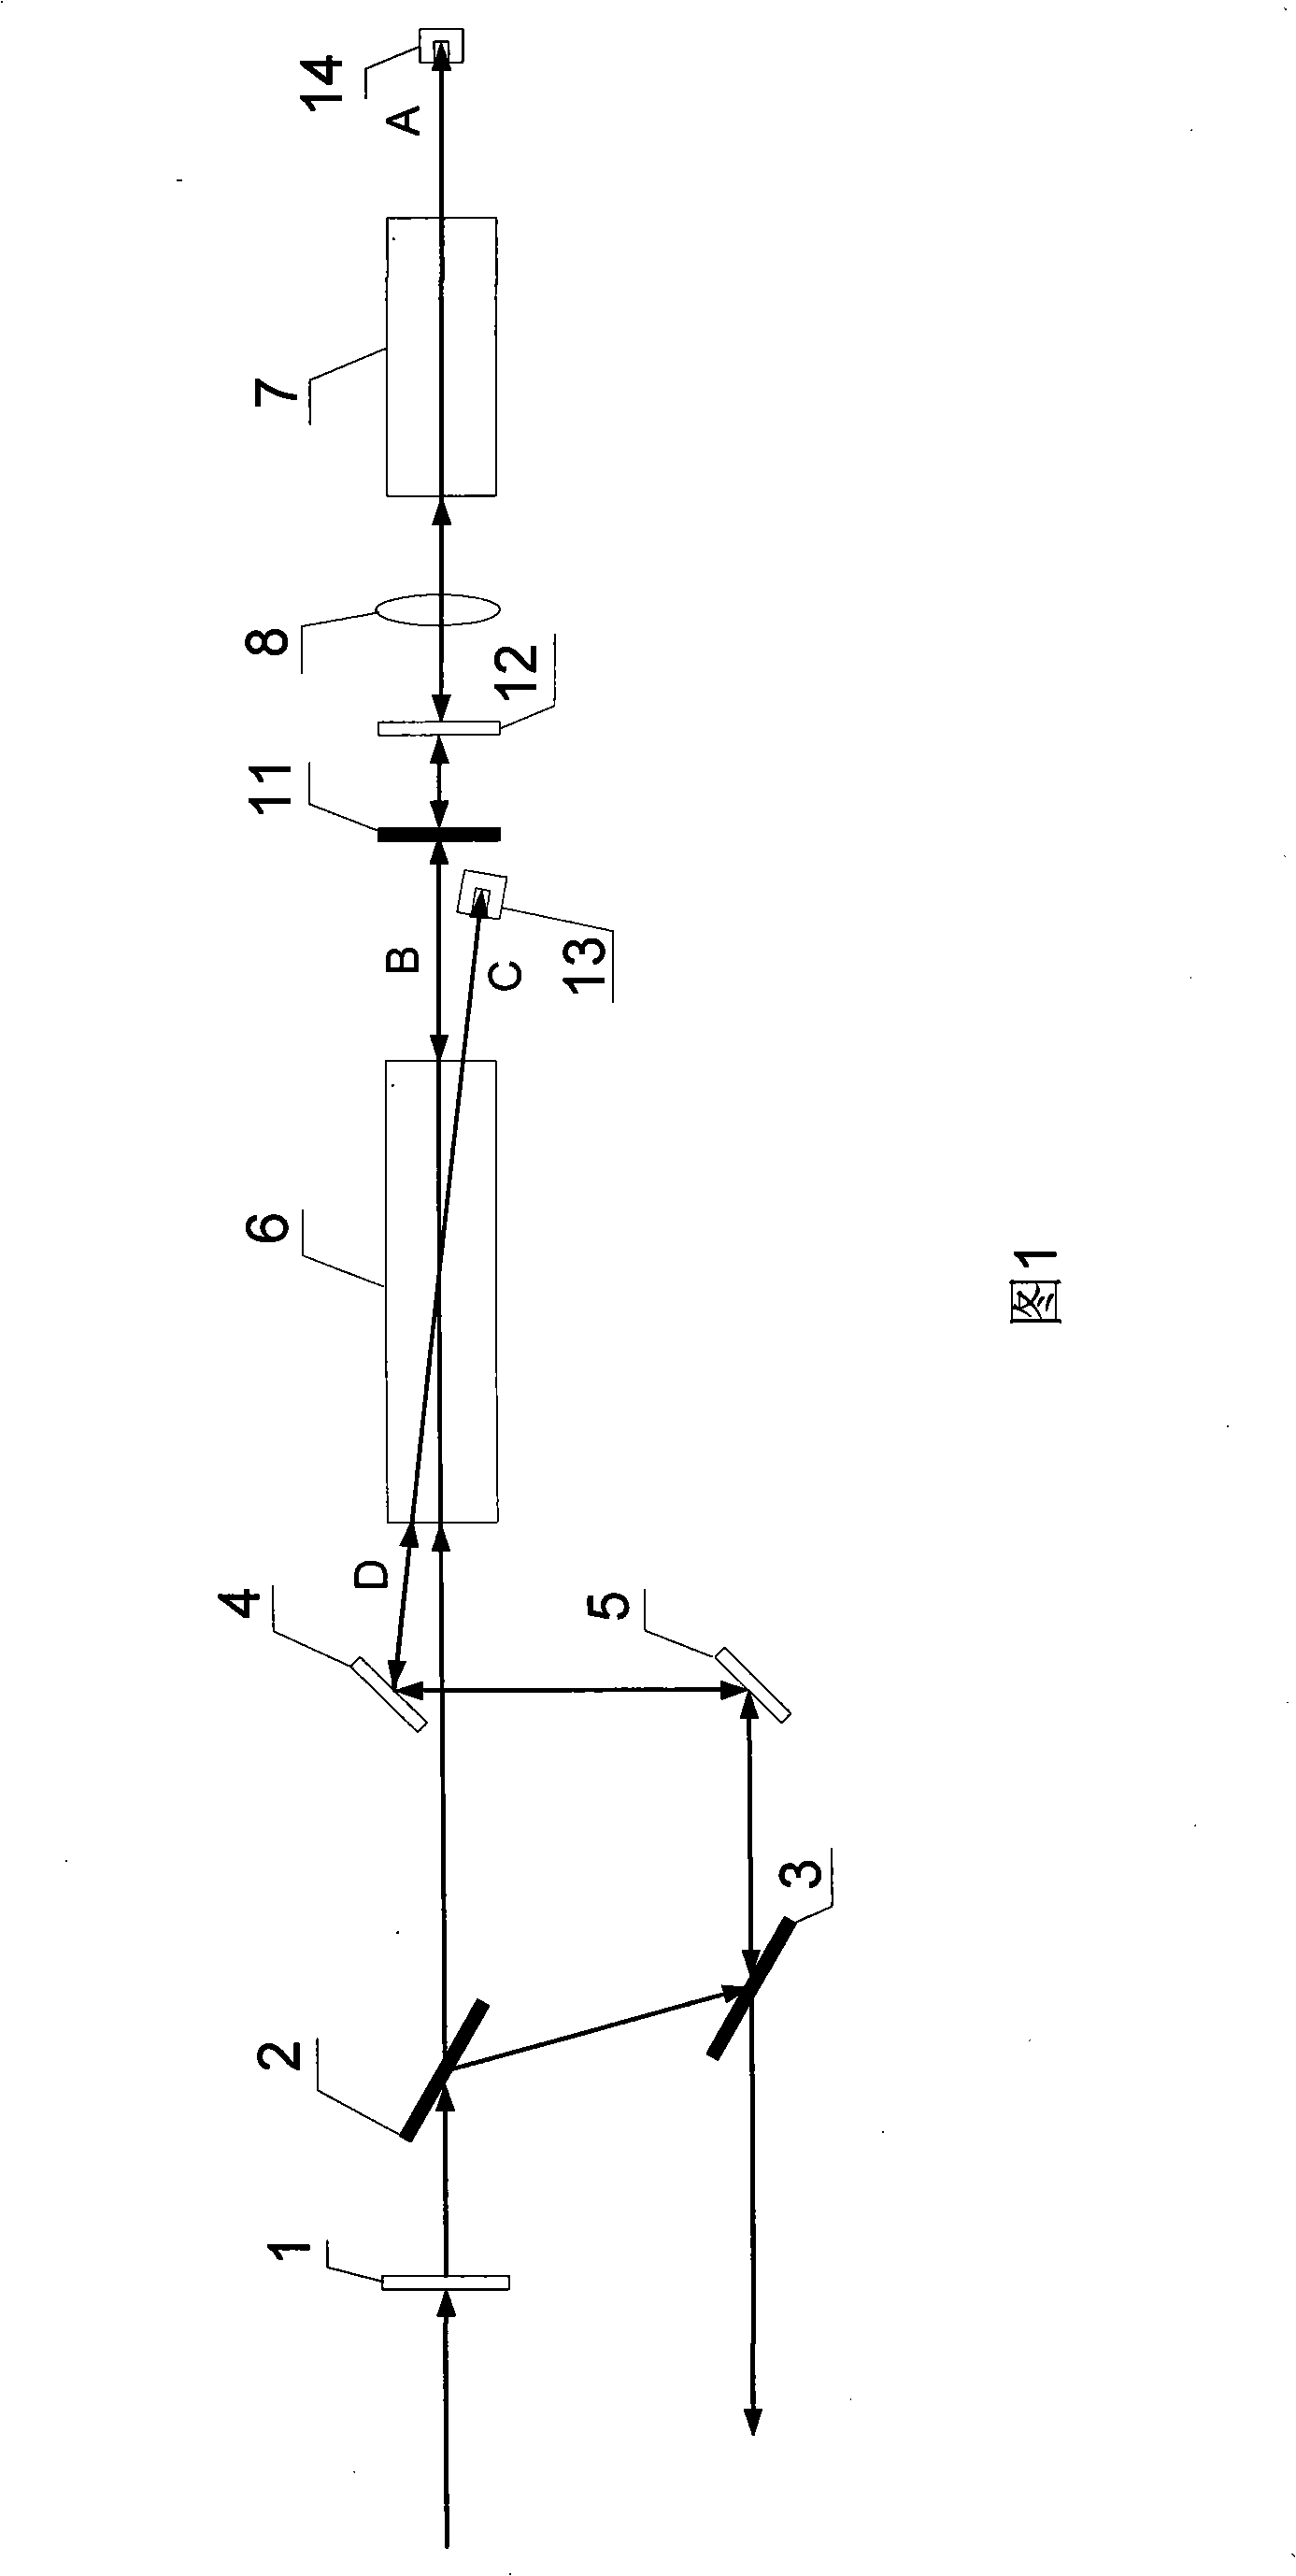 Method for acquiring hyper-stable Stokes frequency shift light